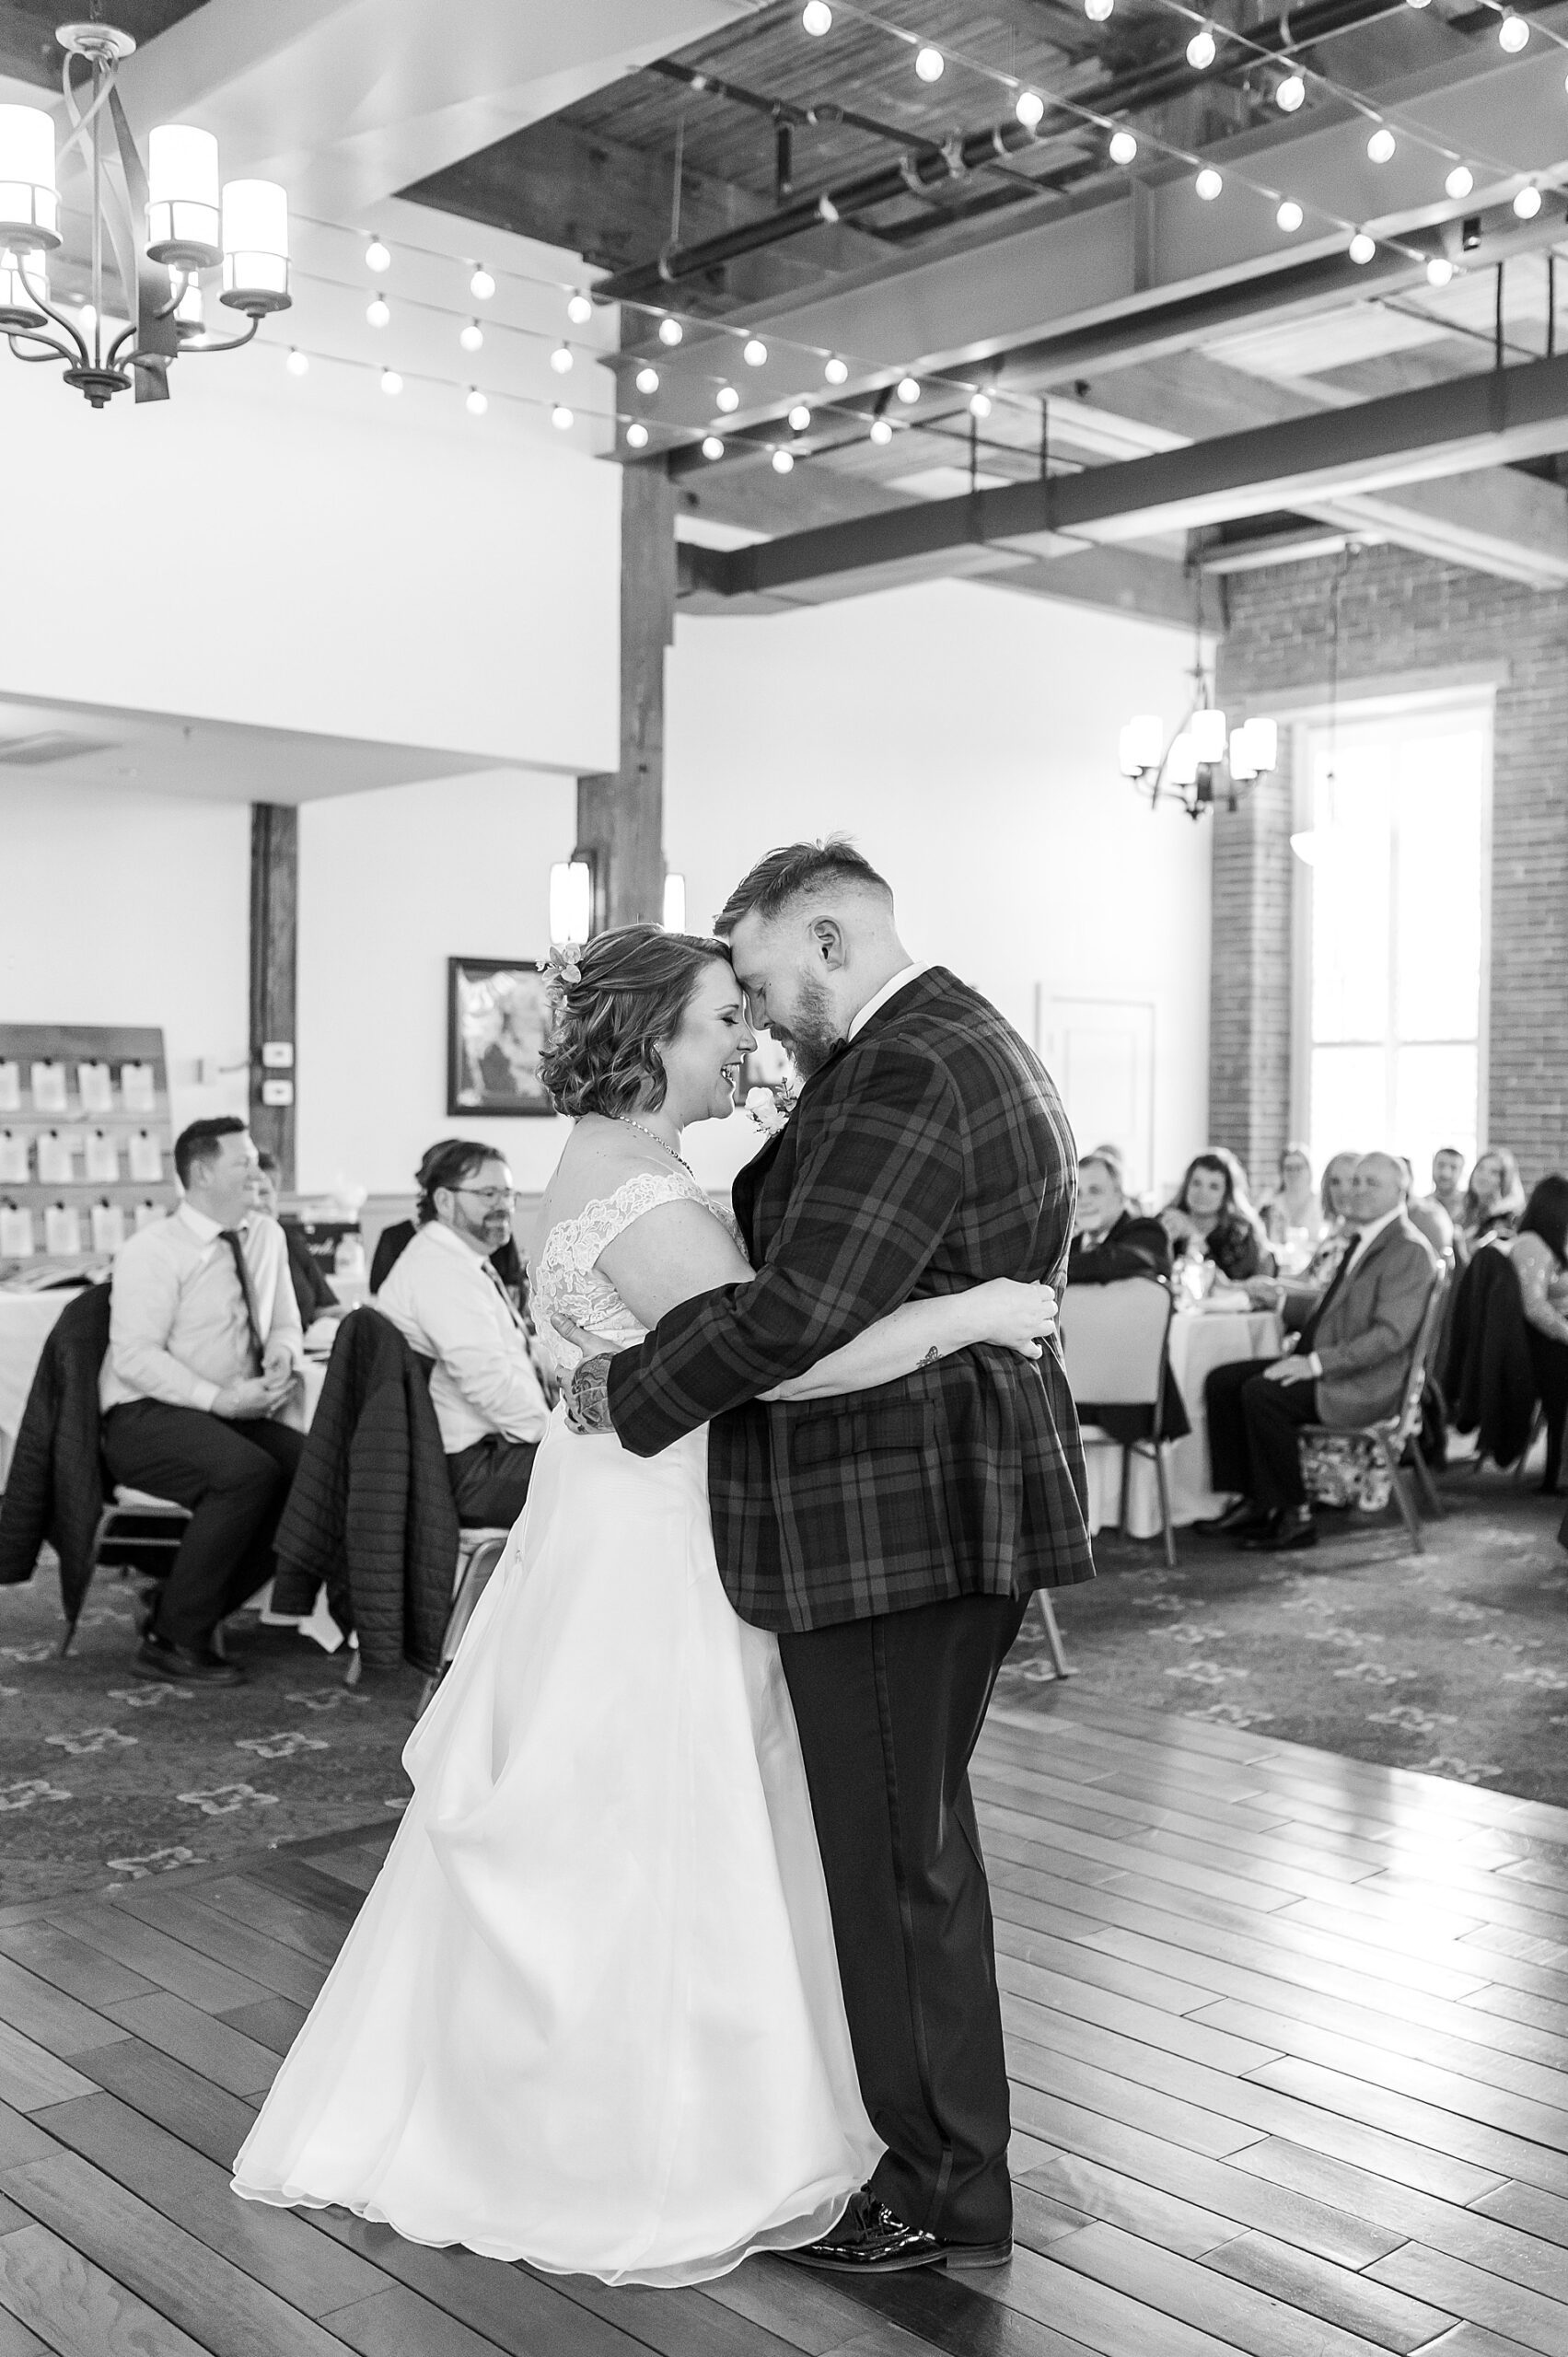 intimate moment between bride and groom sharing first dance together